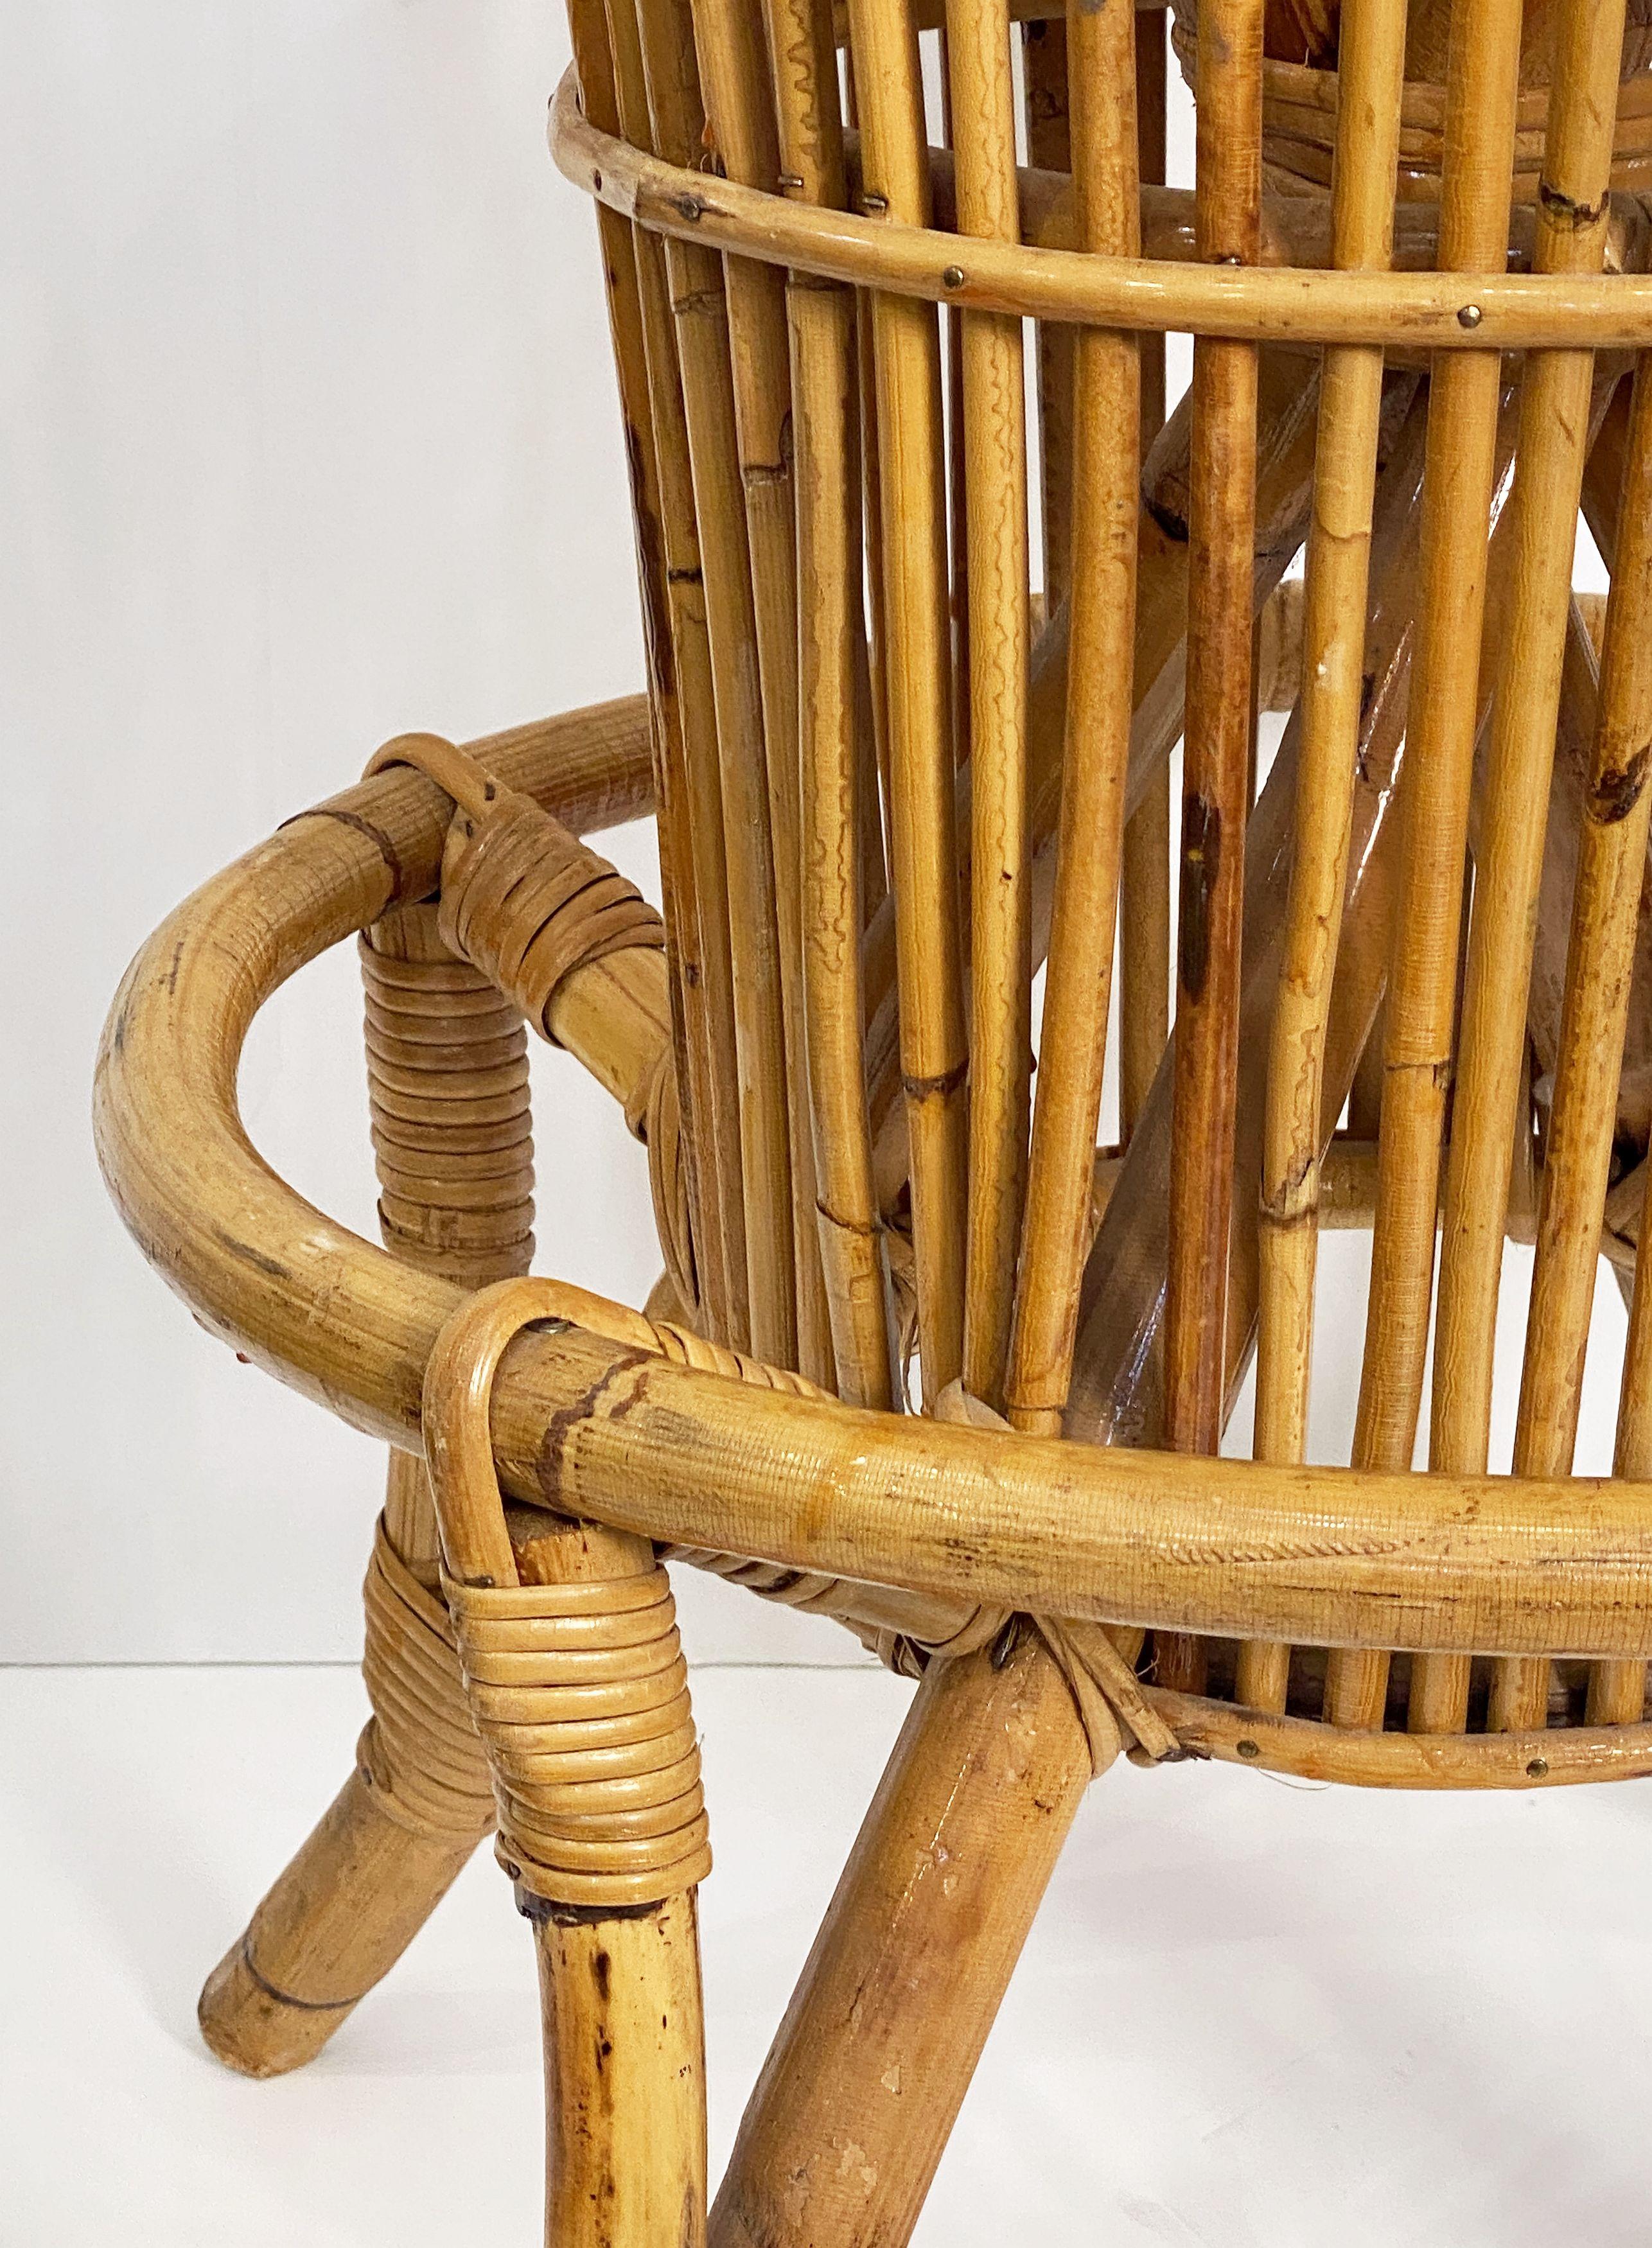 Italian Stool of Rattan and Bamboo from the Mid-20th Century For Sale 4